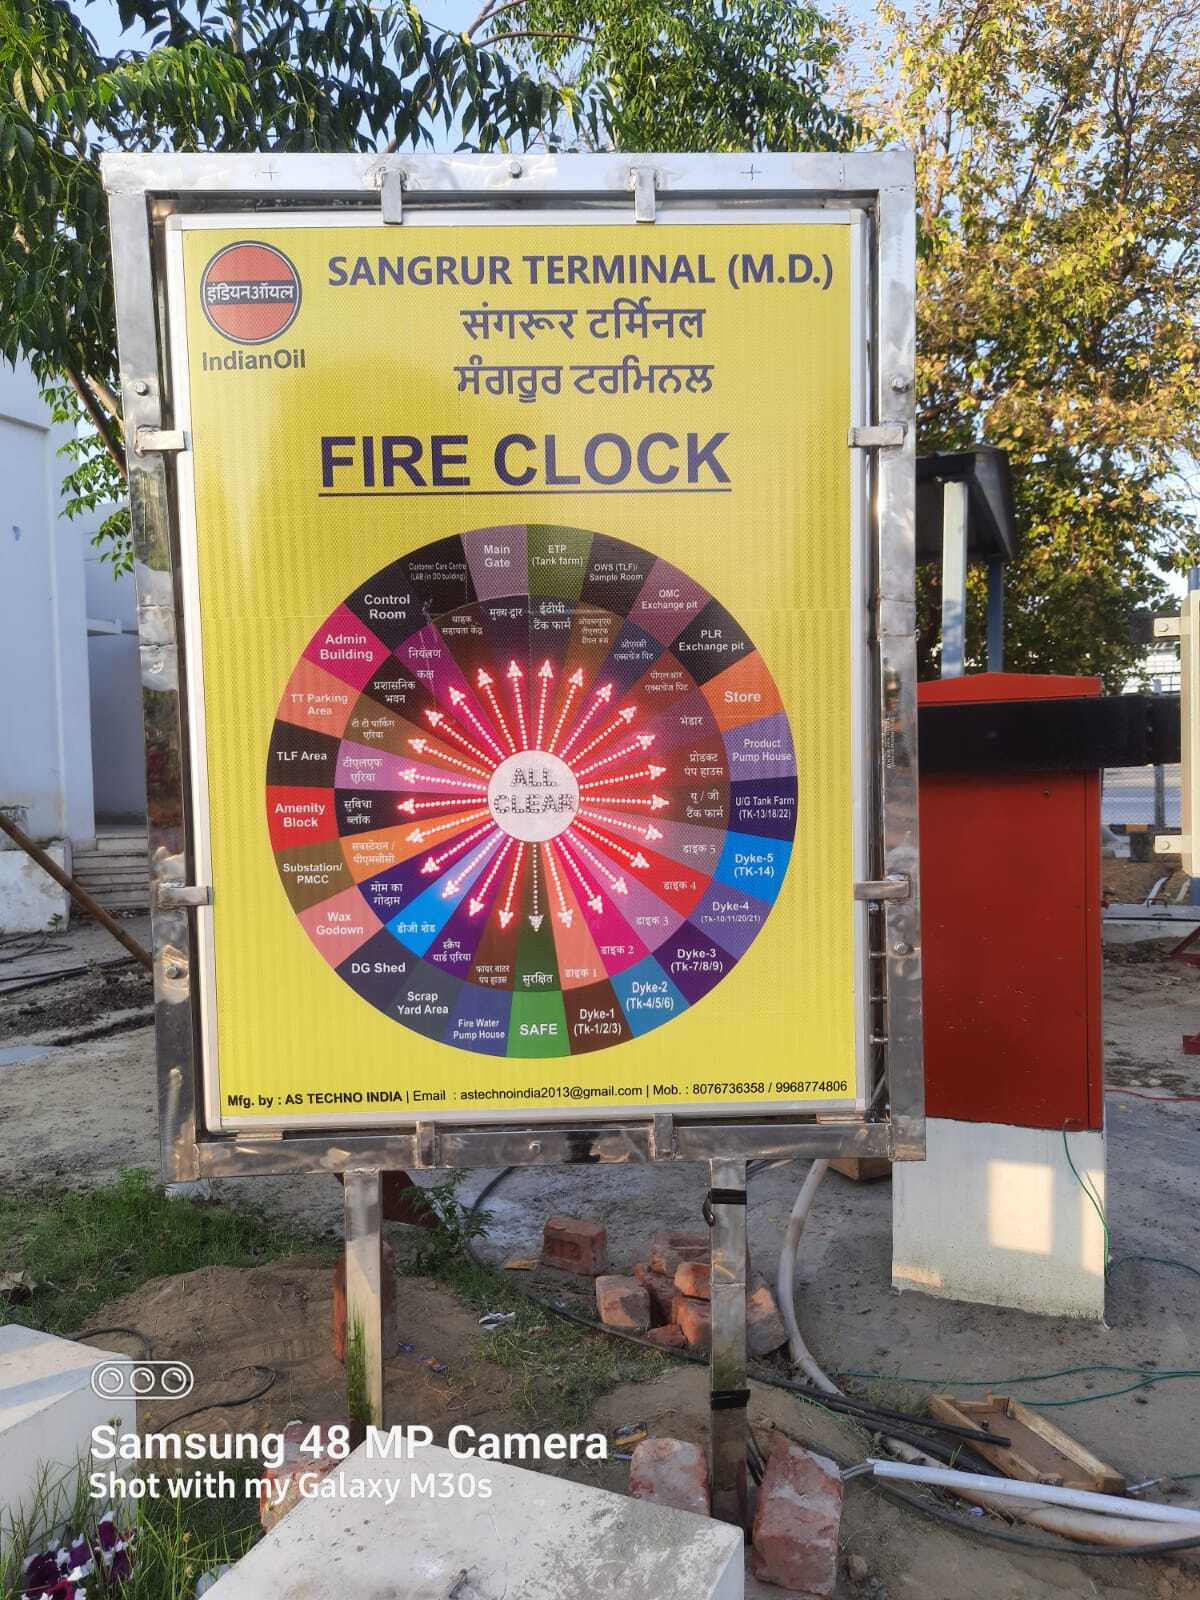 FIRE CLOCK DISPLAY AND CONTROL PANEL